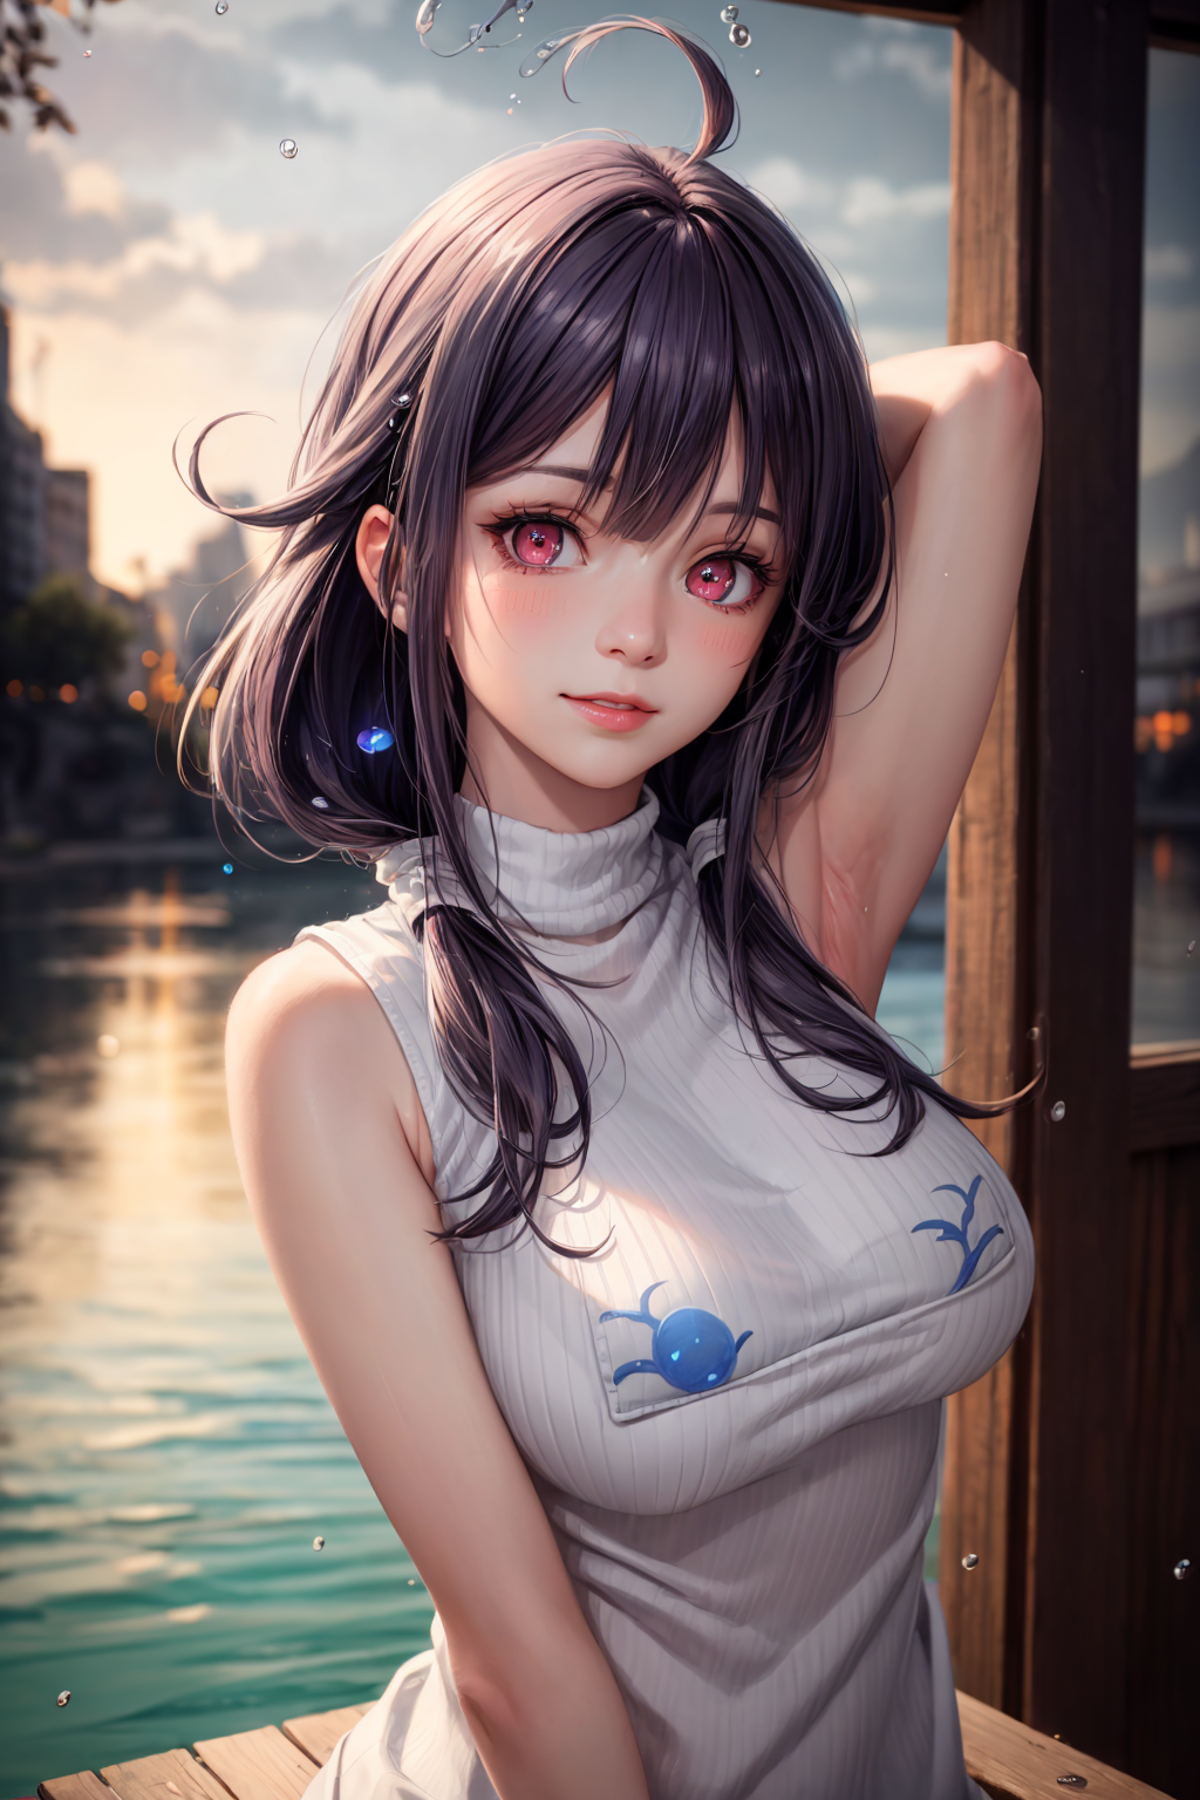 Taigei | Kantai Collection image by manhunter11